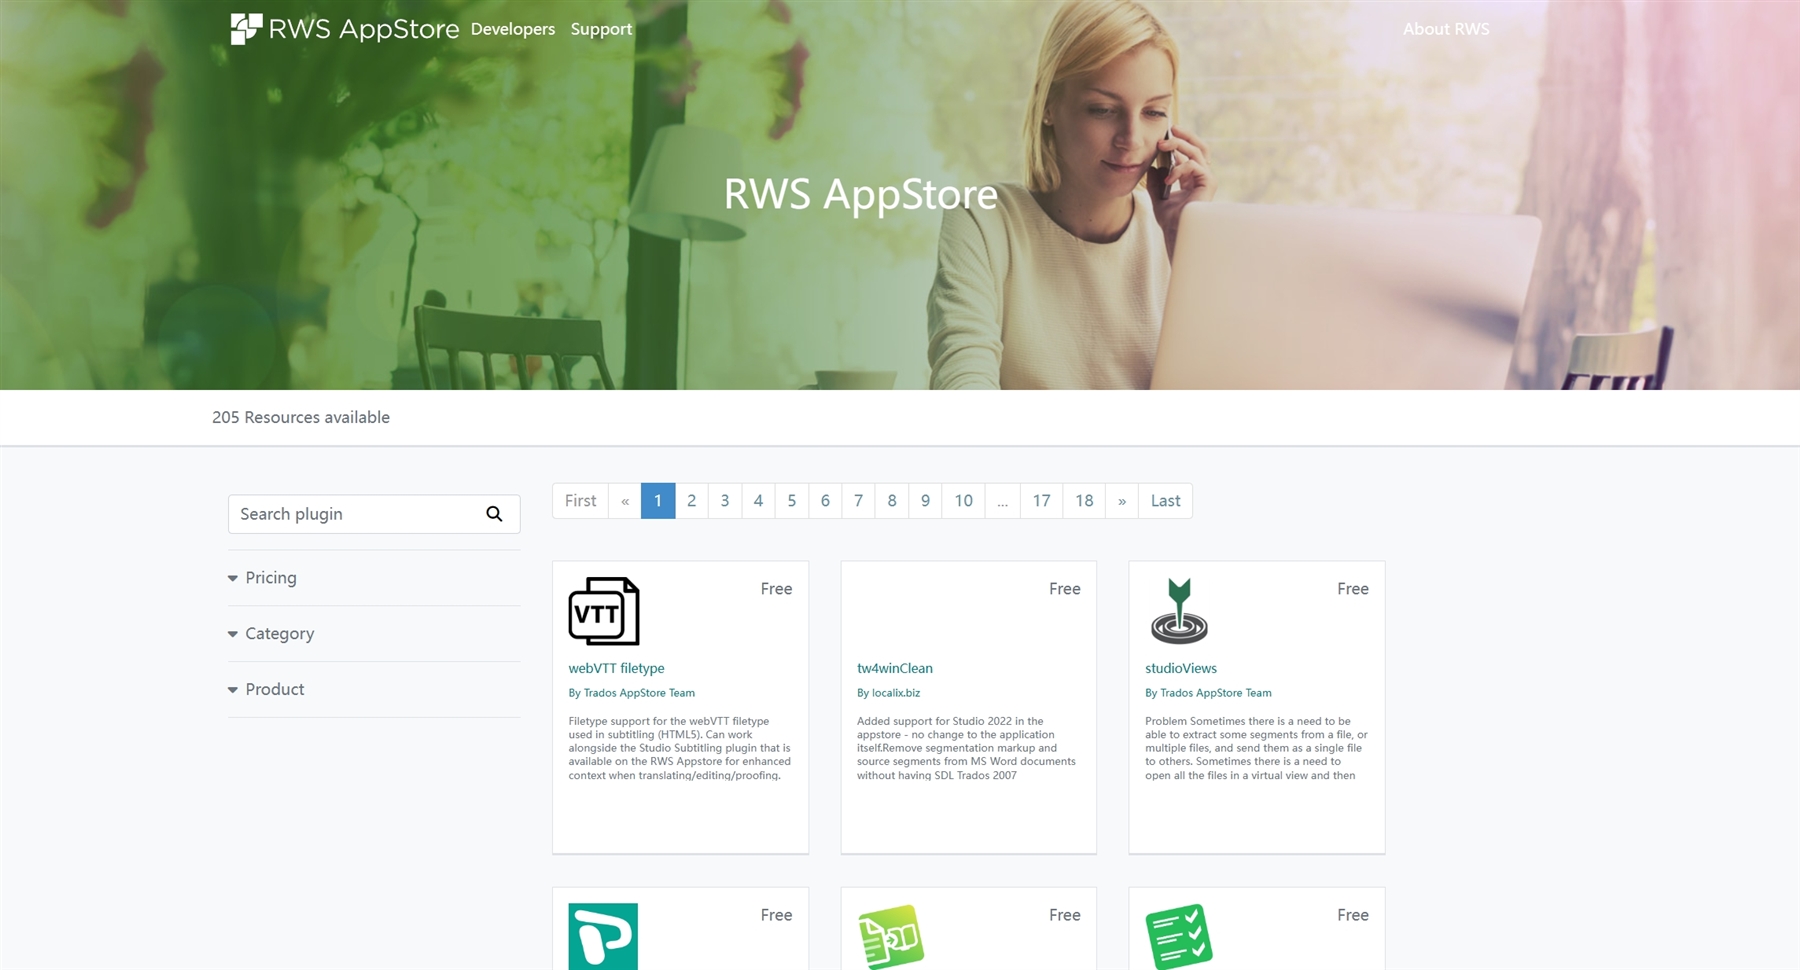 RWS AppStore webpage showing 205 resources available with a search bar and filters for pricing, category, and product. Featured plugins include 'webVTT filetype', 'tw4winClean', and 'studioViews', all listed as free.